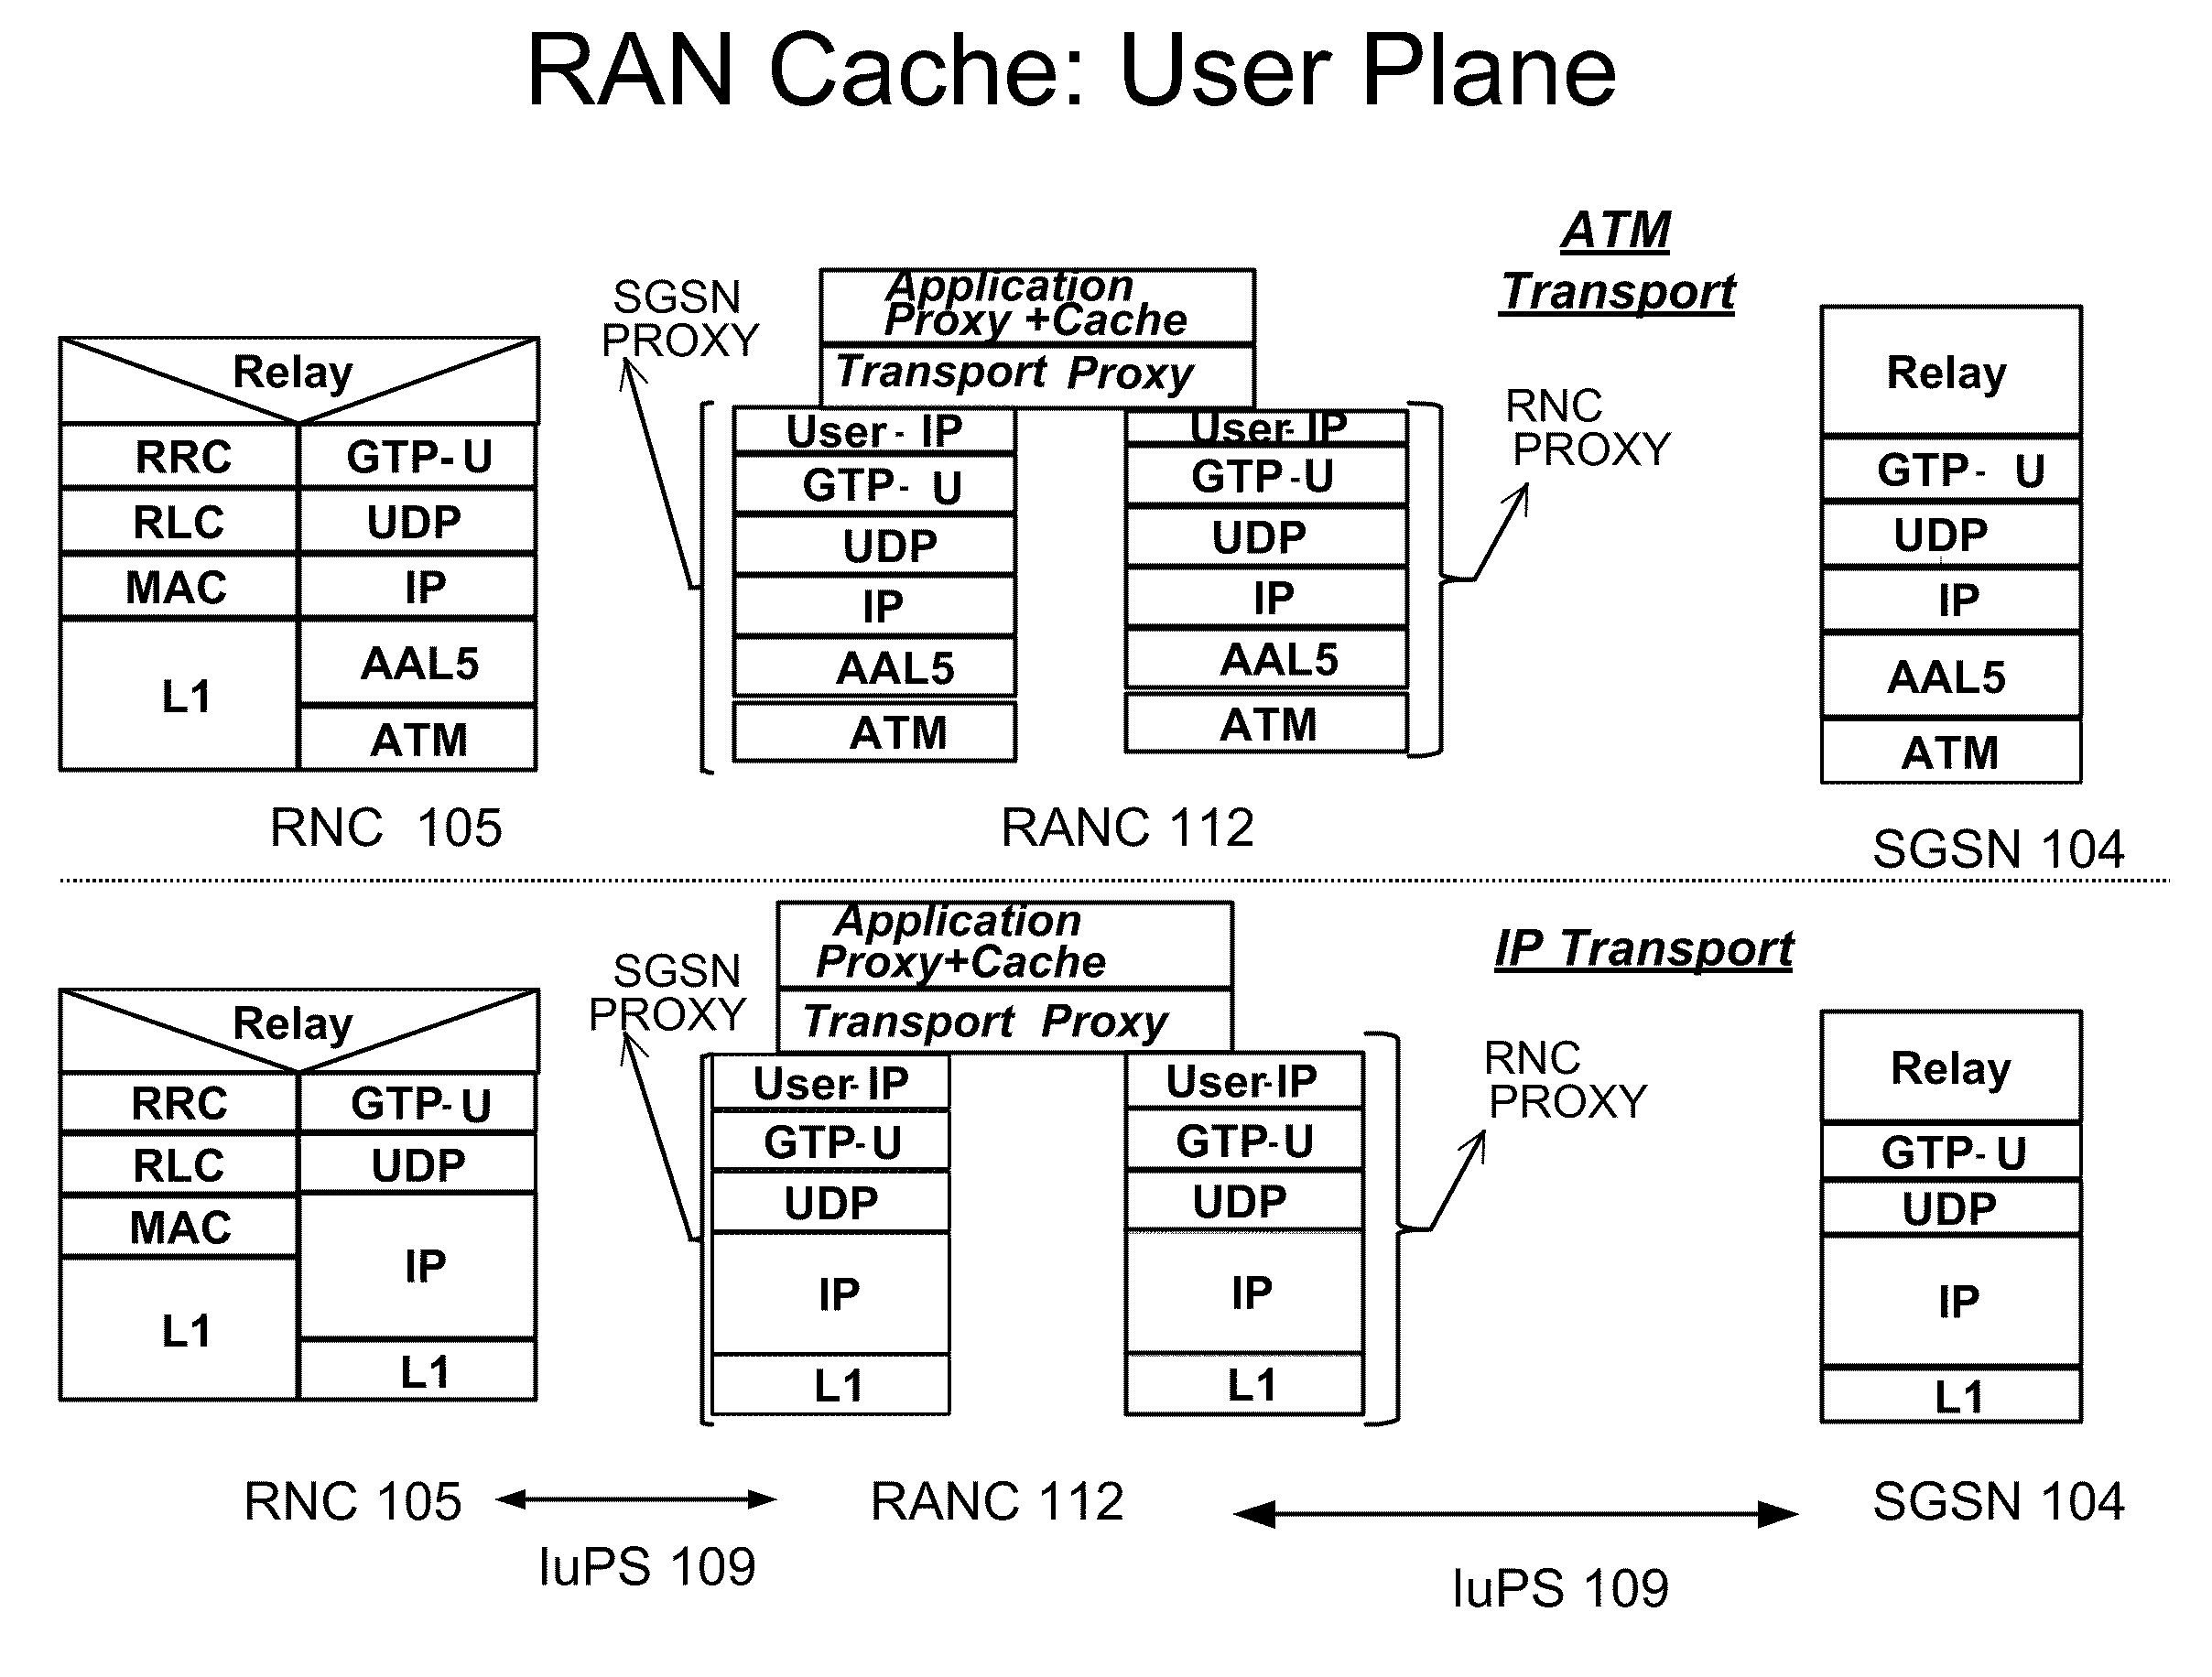 Content Caching in the Radio Access Network (RAN)